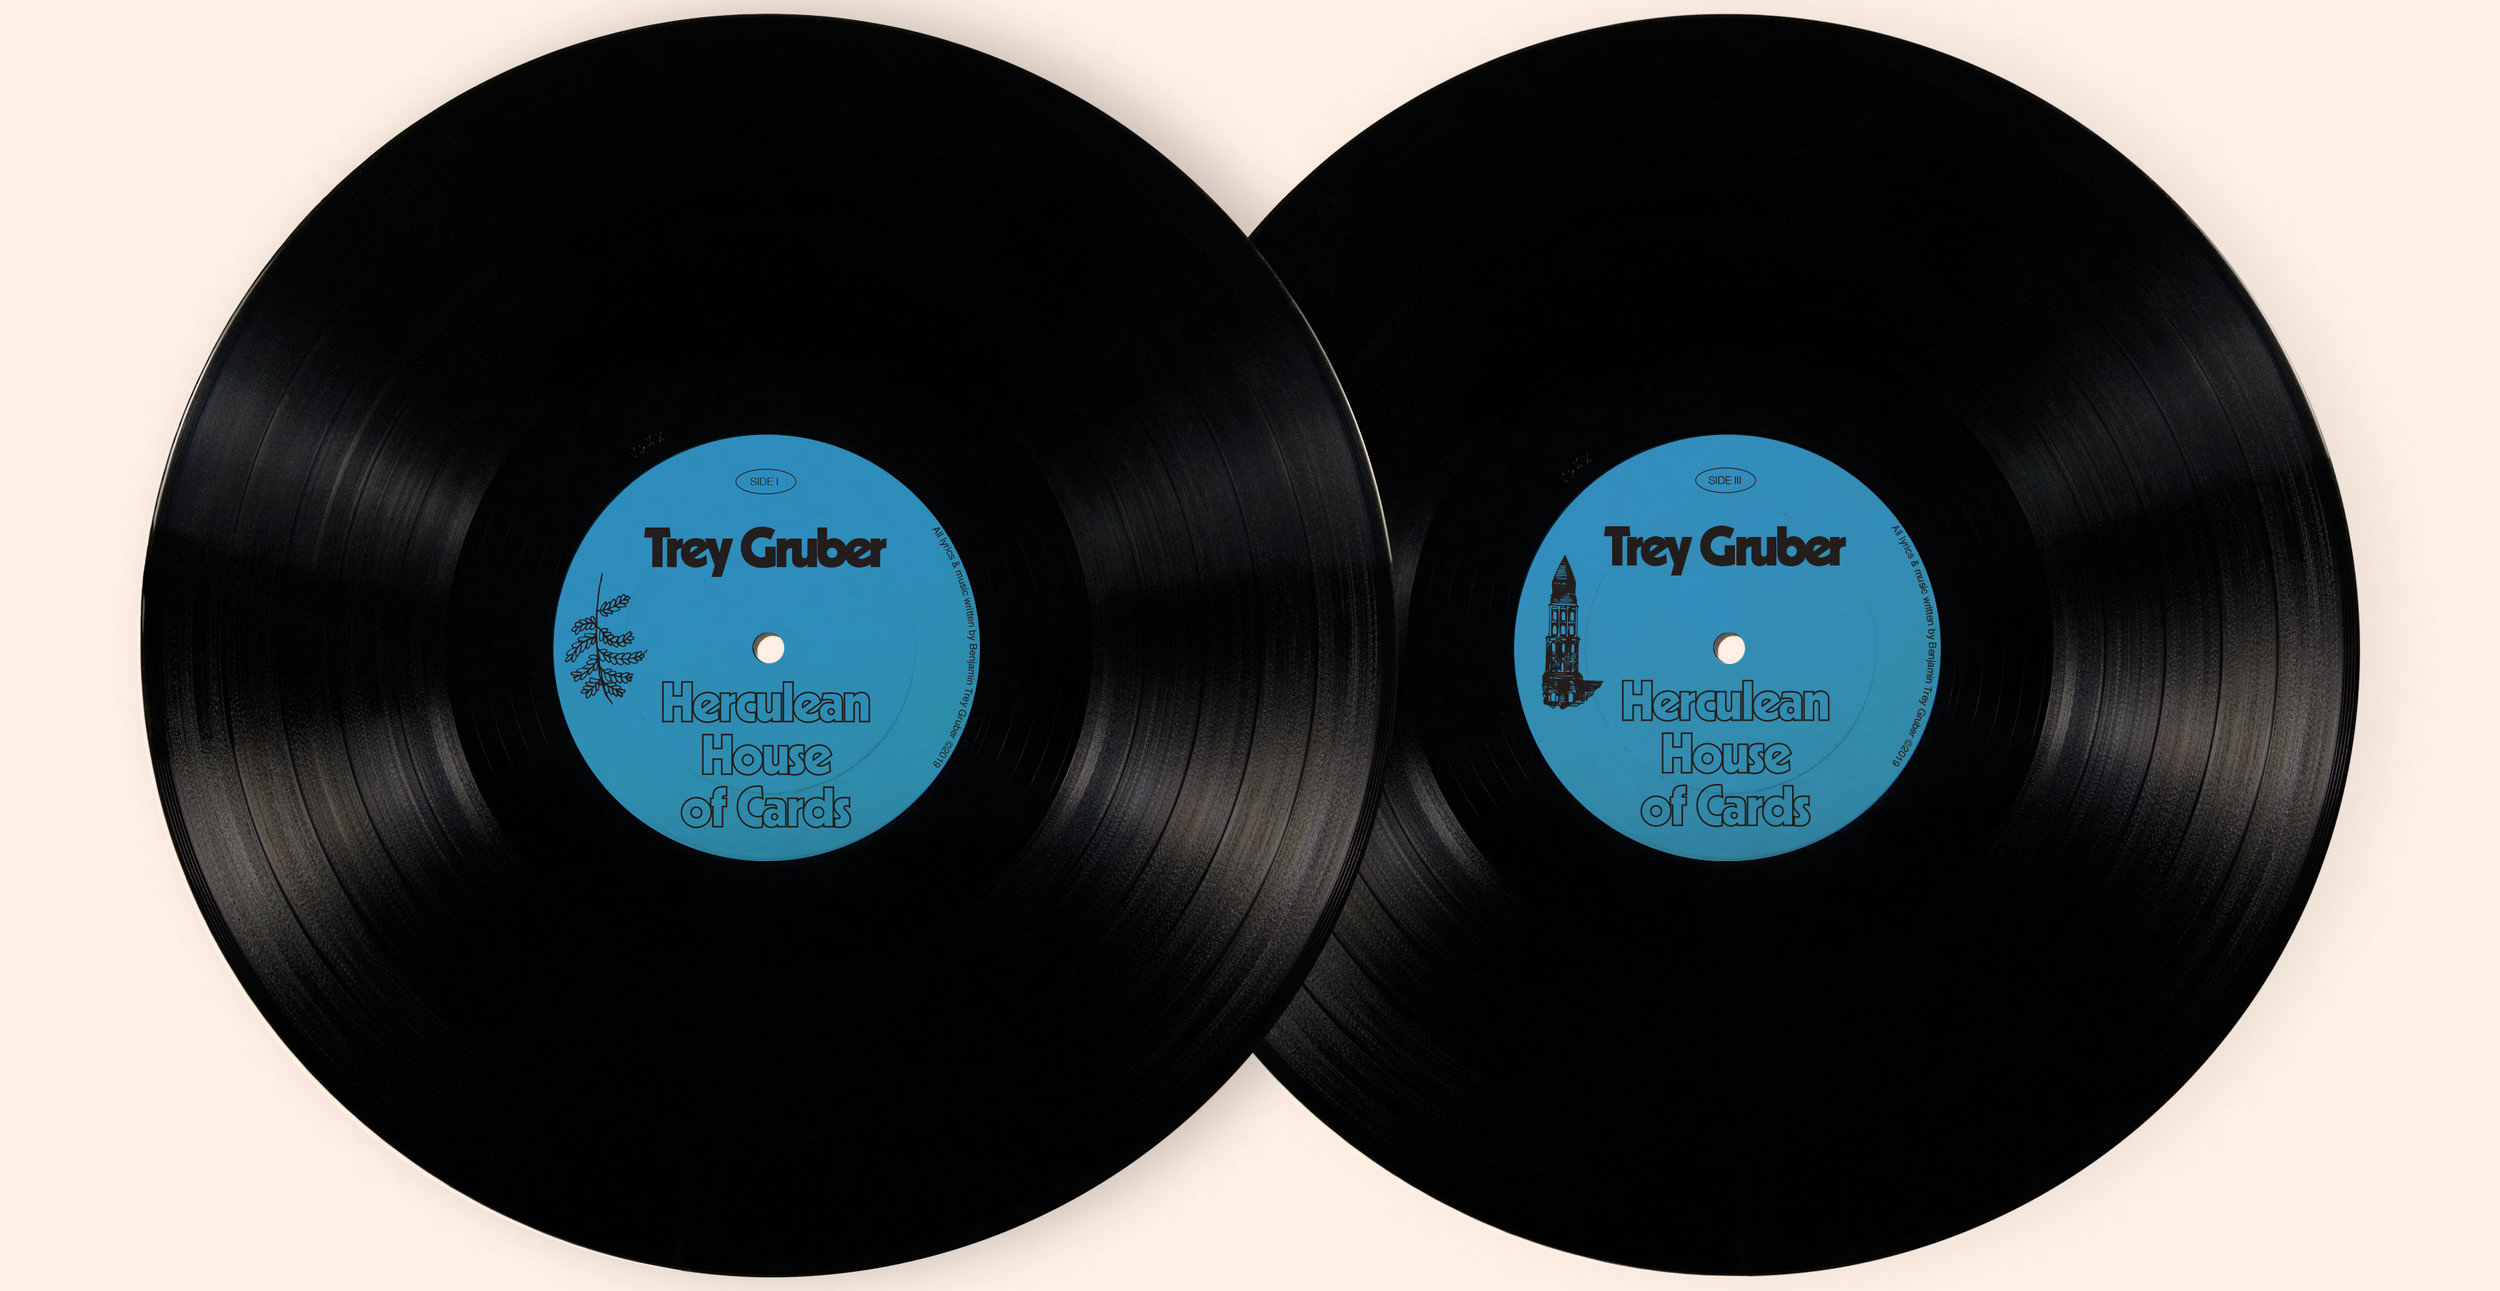 Sold Out ⋅ Trey Gruber — Herculean House of Cards Double LP 